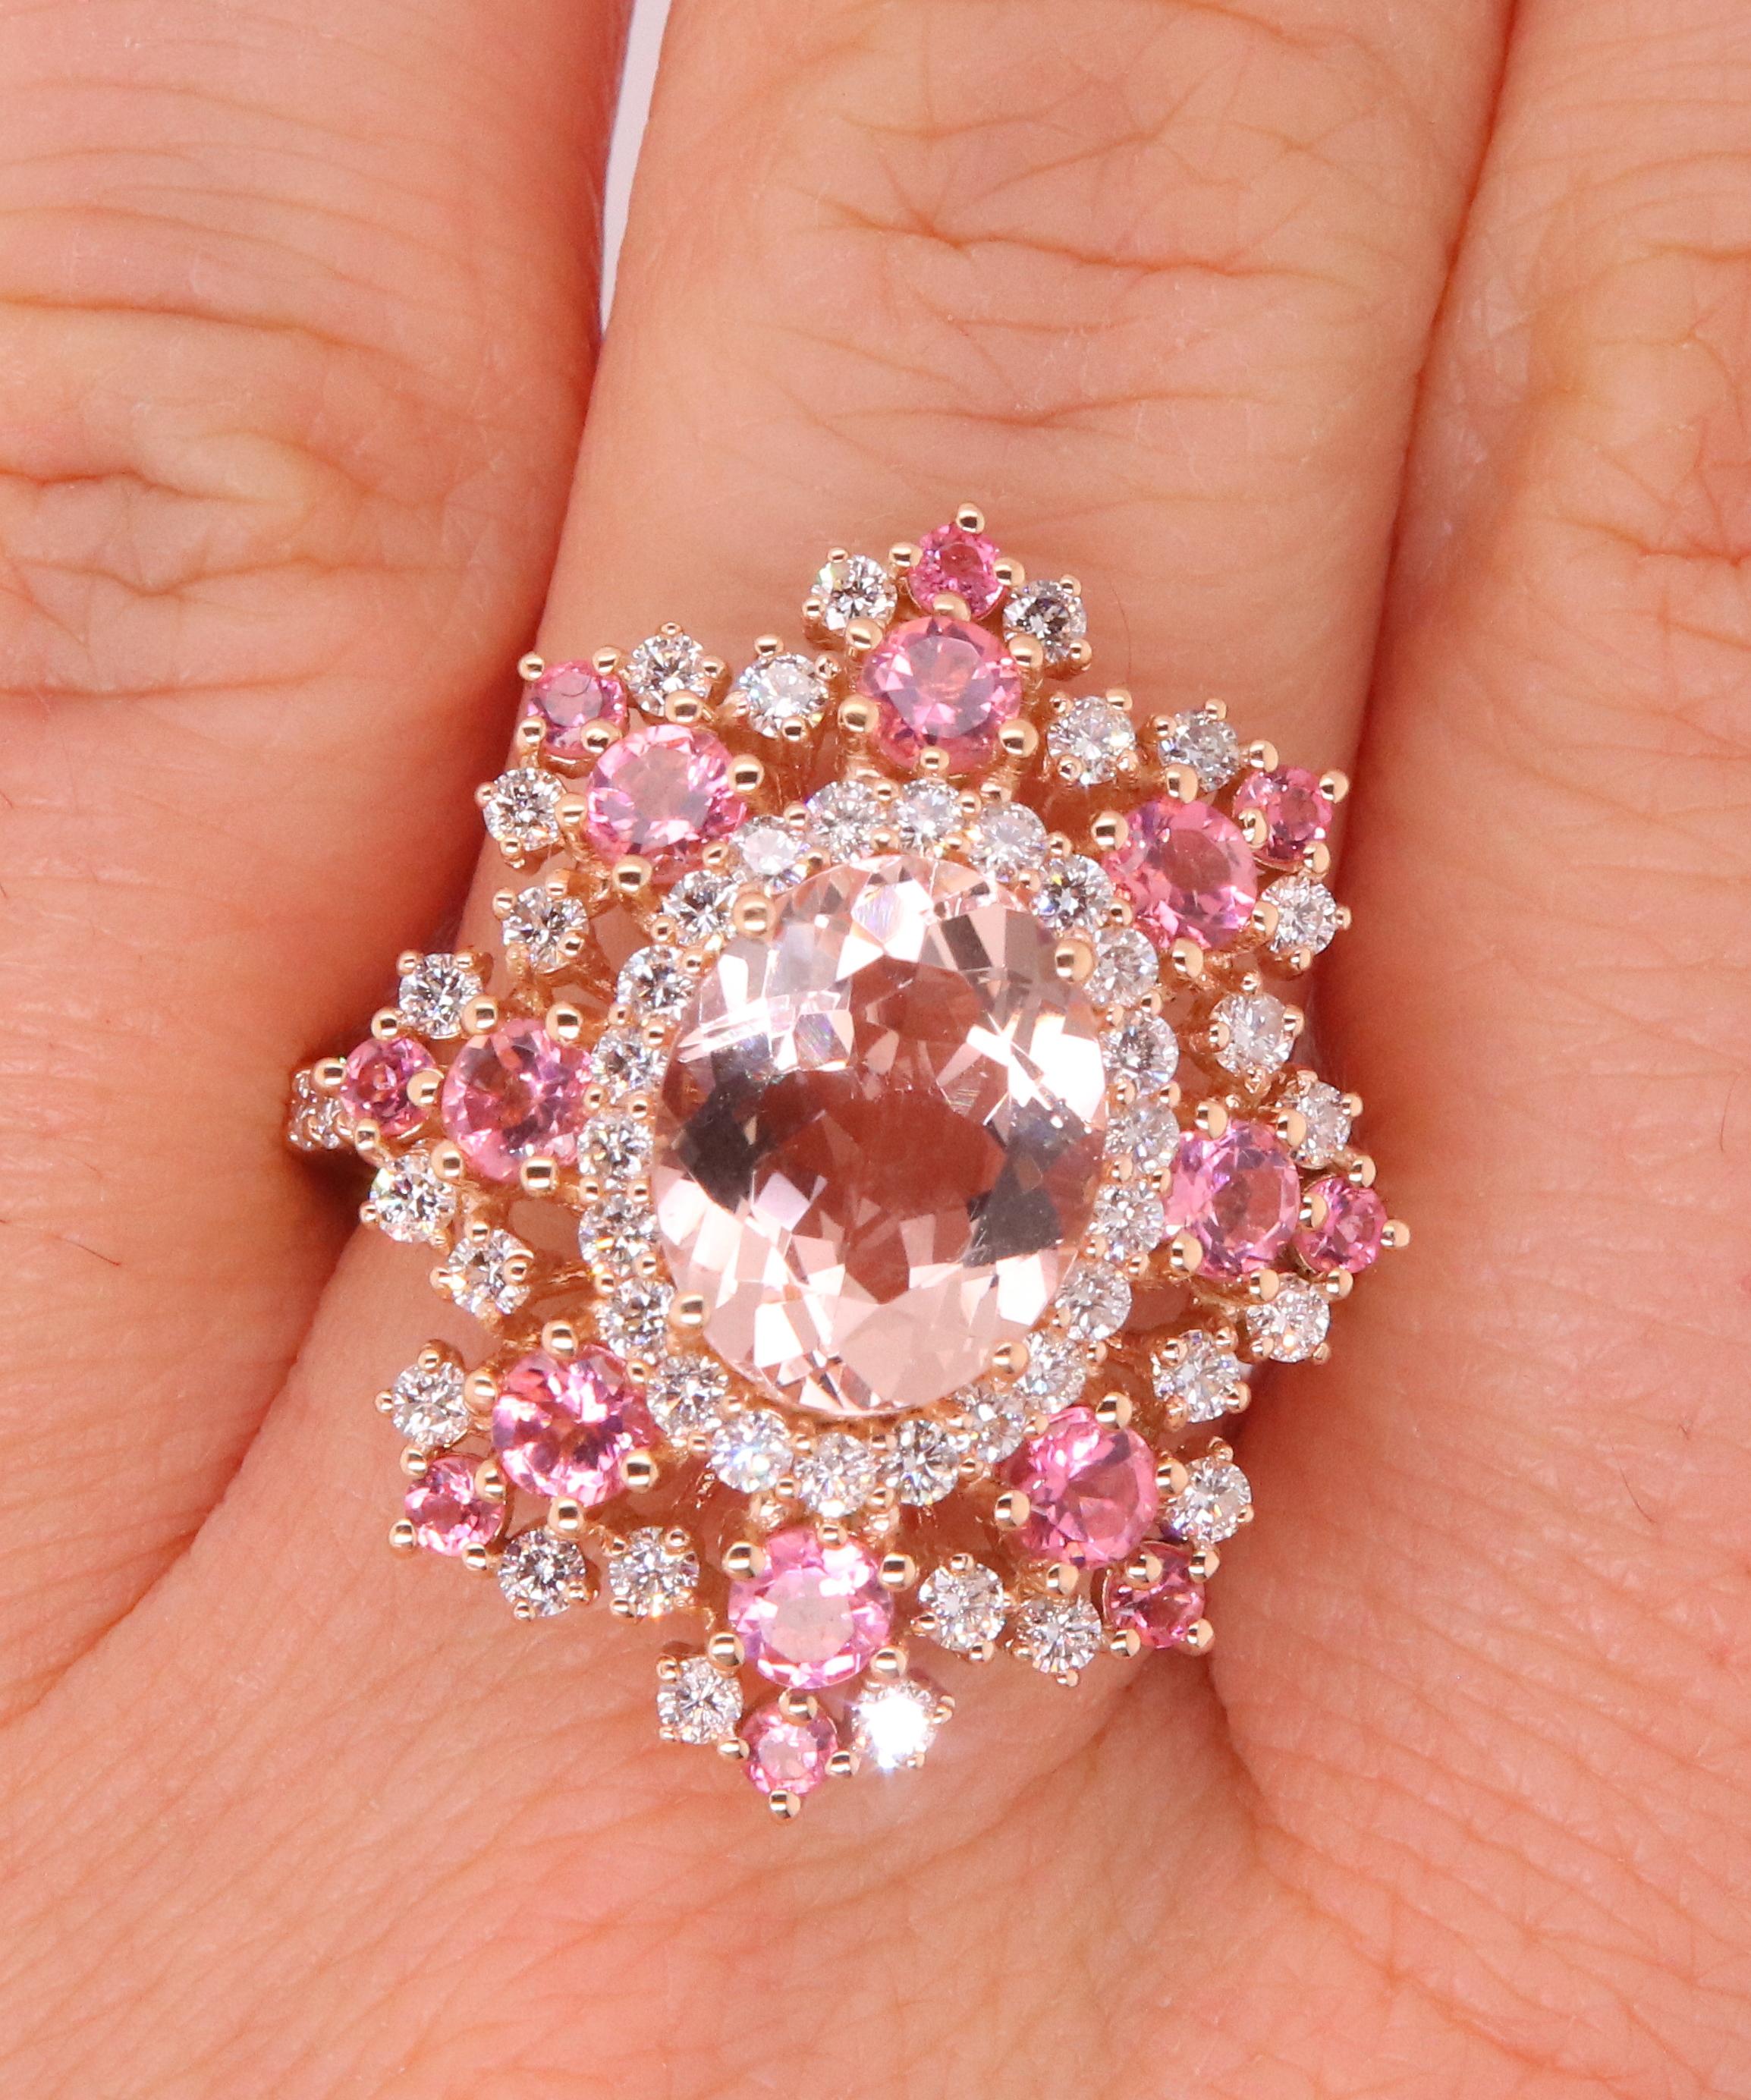 Material: 14k Rose Gold 
Center Stone Details: 1 Oval Pink Morganite at 2.23 Carats - Measuring 10 x 8 mm
Mounting Stone Details: 16 Round Pink Tourmalines at 1.08 Carats
Diamond Details: 54 Brilliant Round White Diamonds at 0.77 Carats - Clarity: